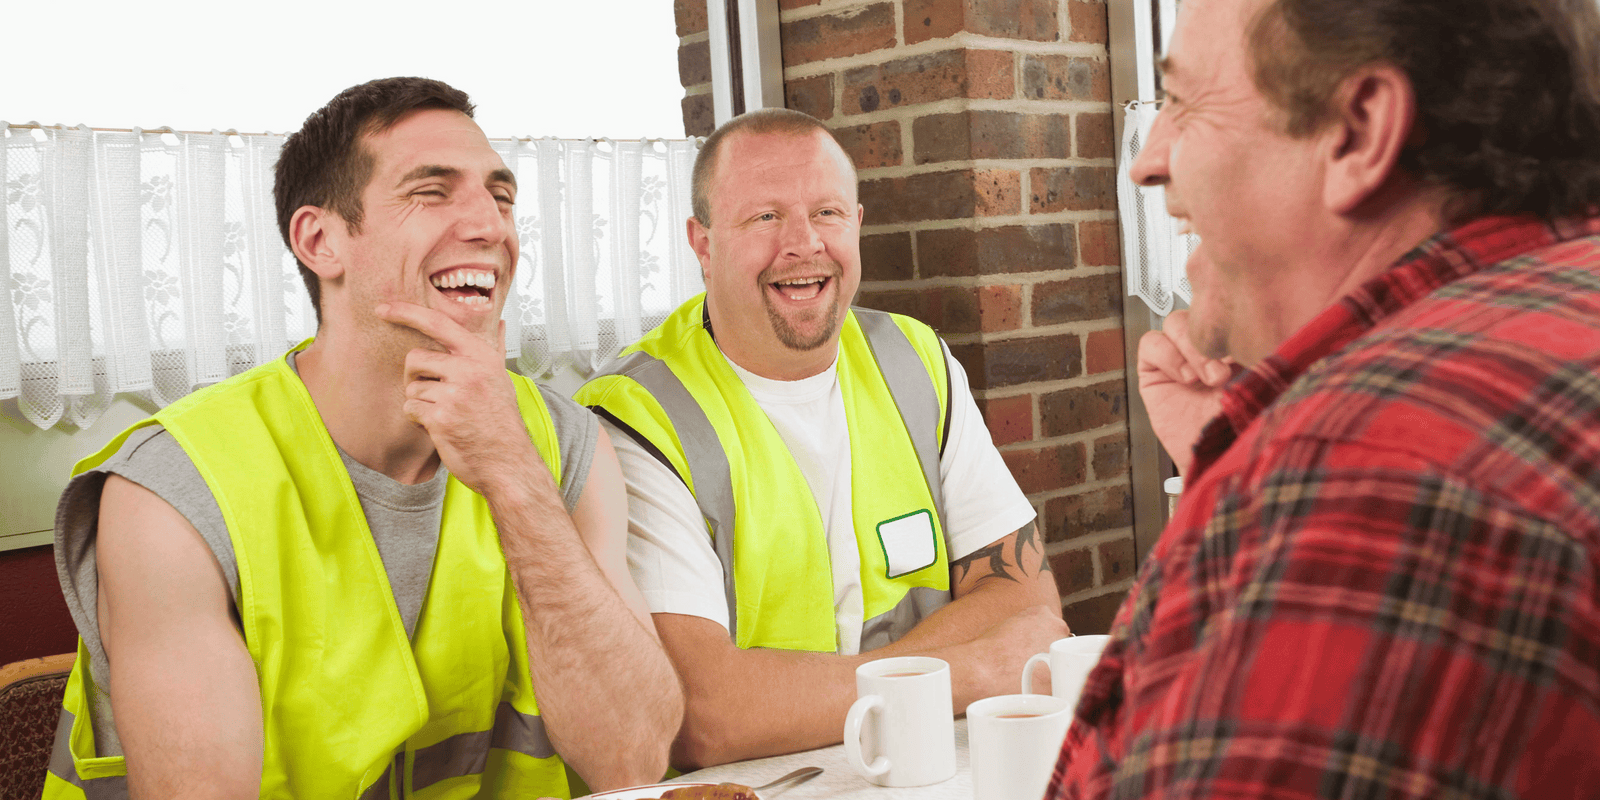 Tips for Managing a Team in the Construction Industry